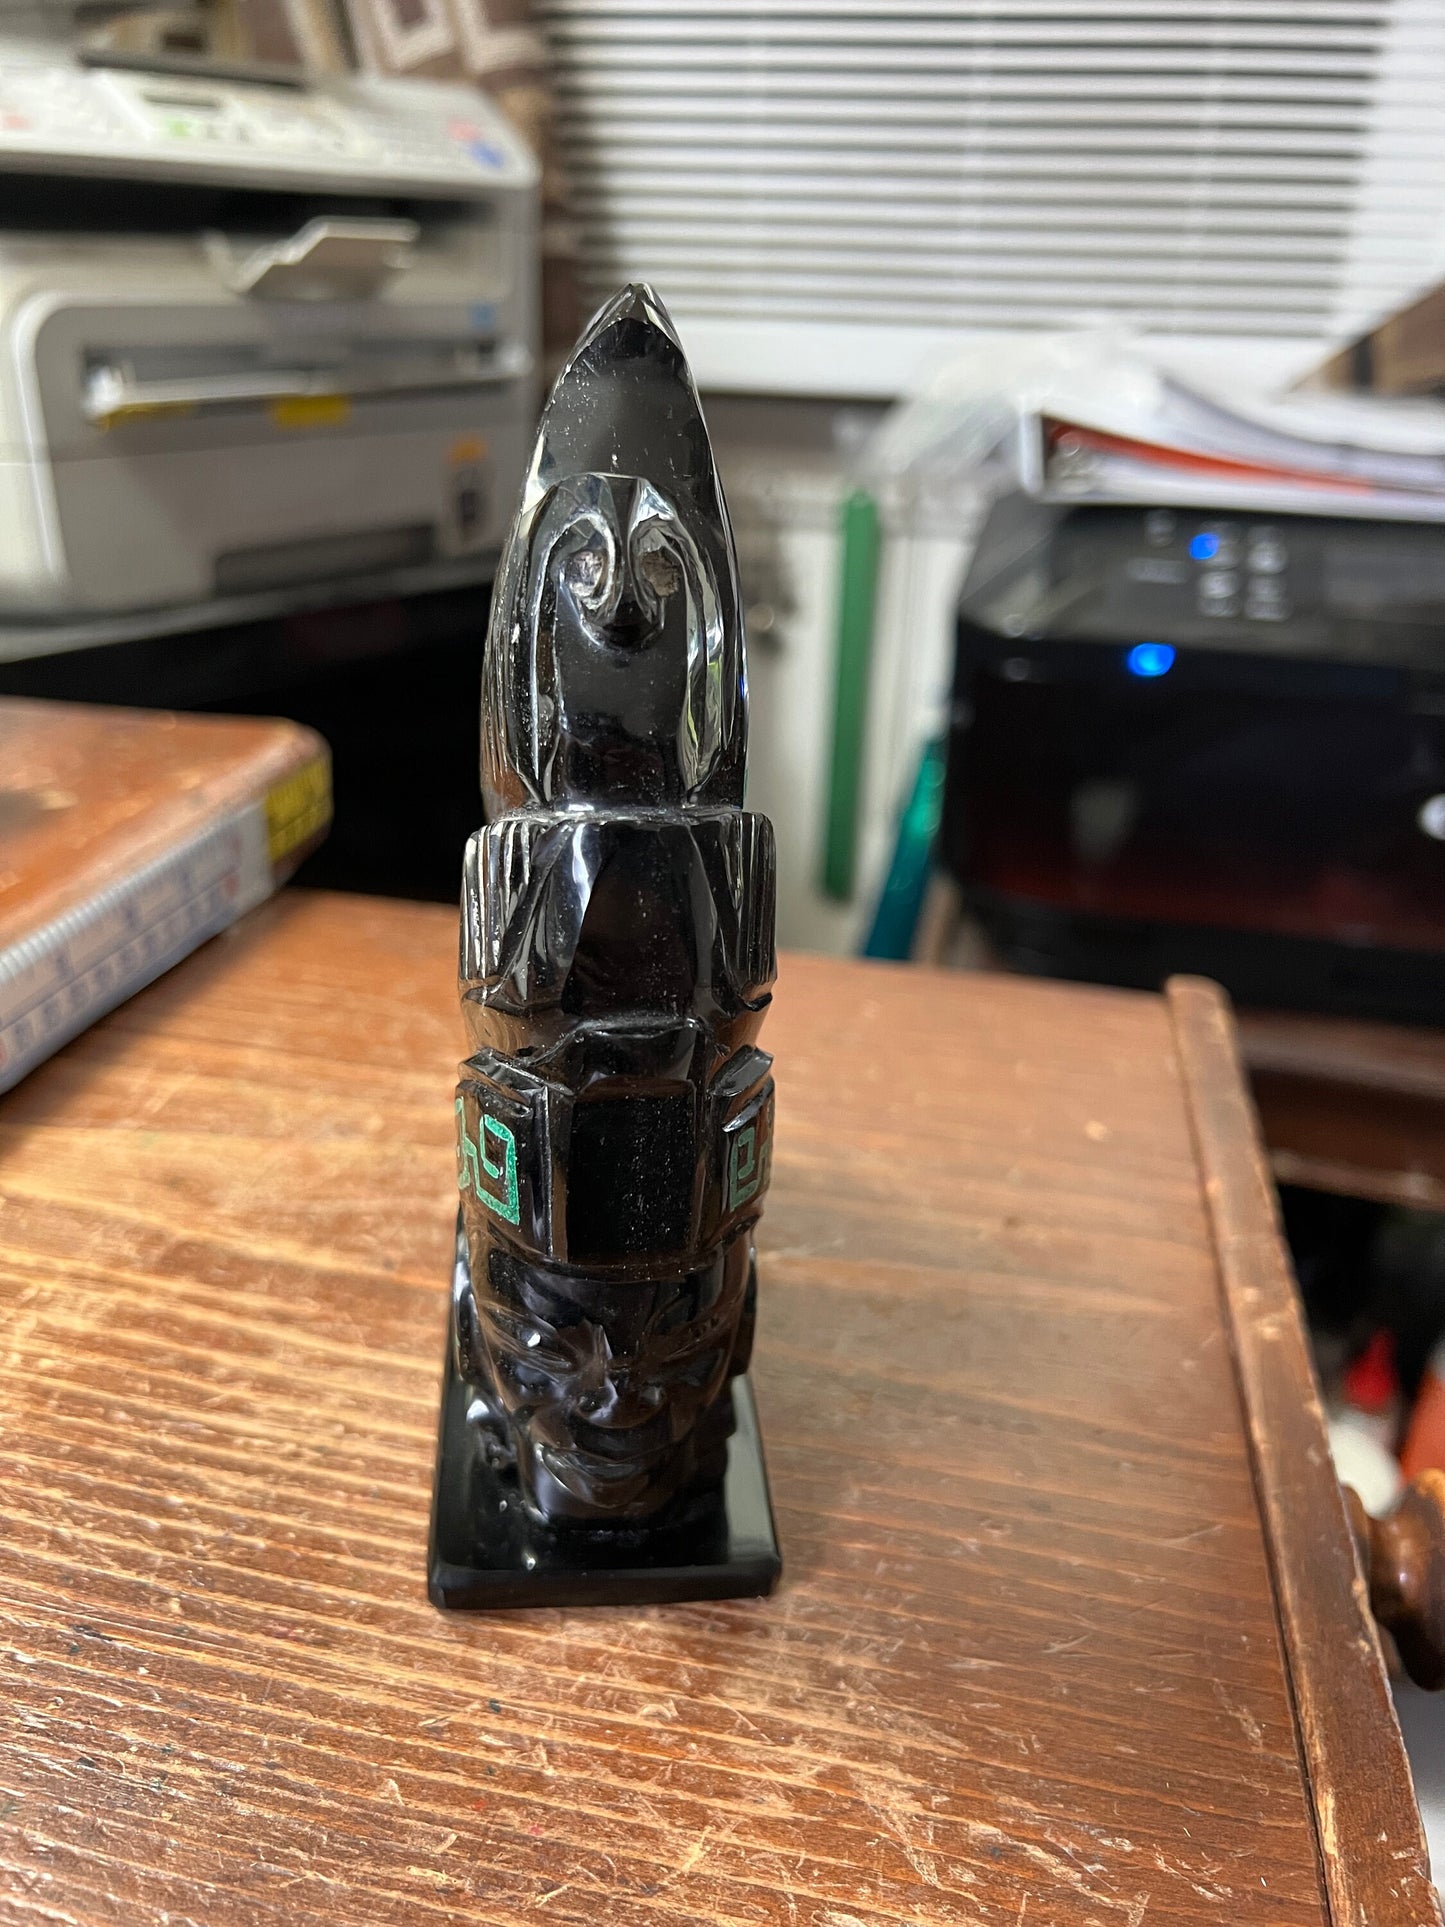 Gold Obsidian Aztec or Mayan Warrior Statue, Desk Paper Weight, Home Decor, Mexica